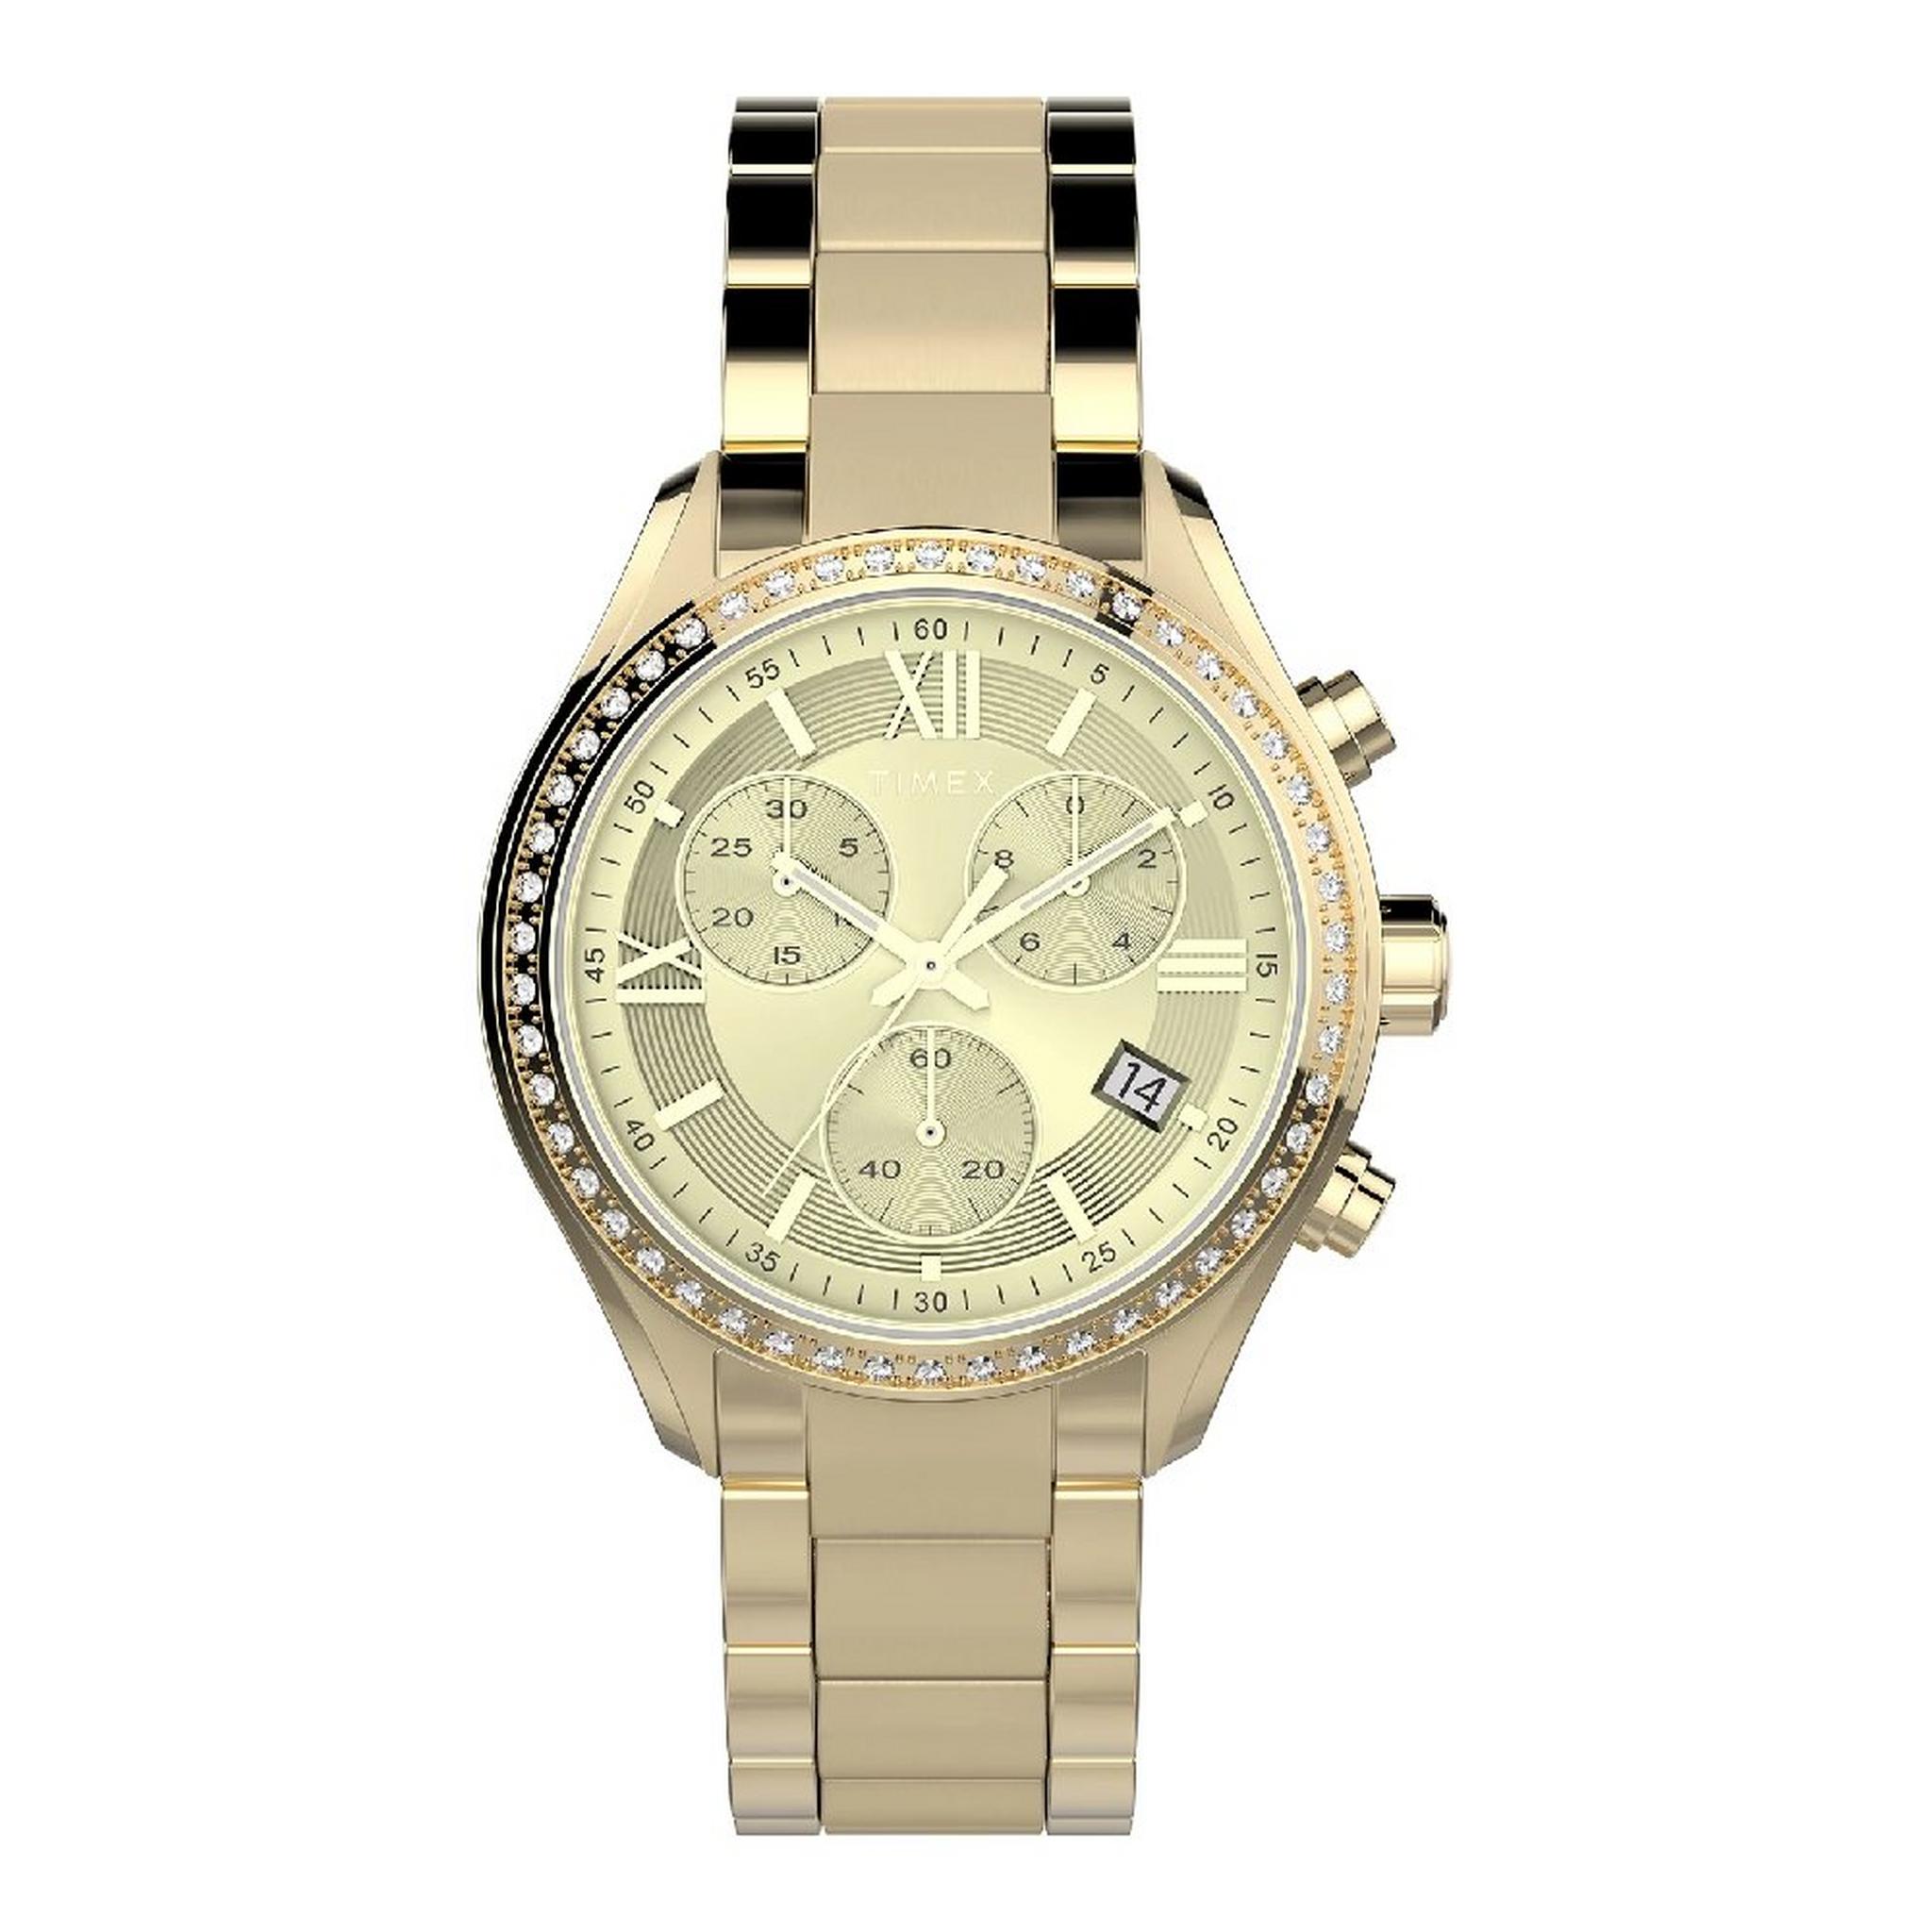 Timex Classic Watch for Women, Chronograph, 38mm, Alloy Band, TW2V57800 - Gold